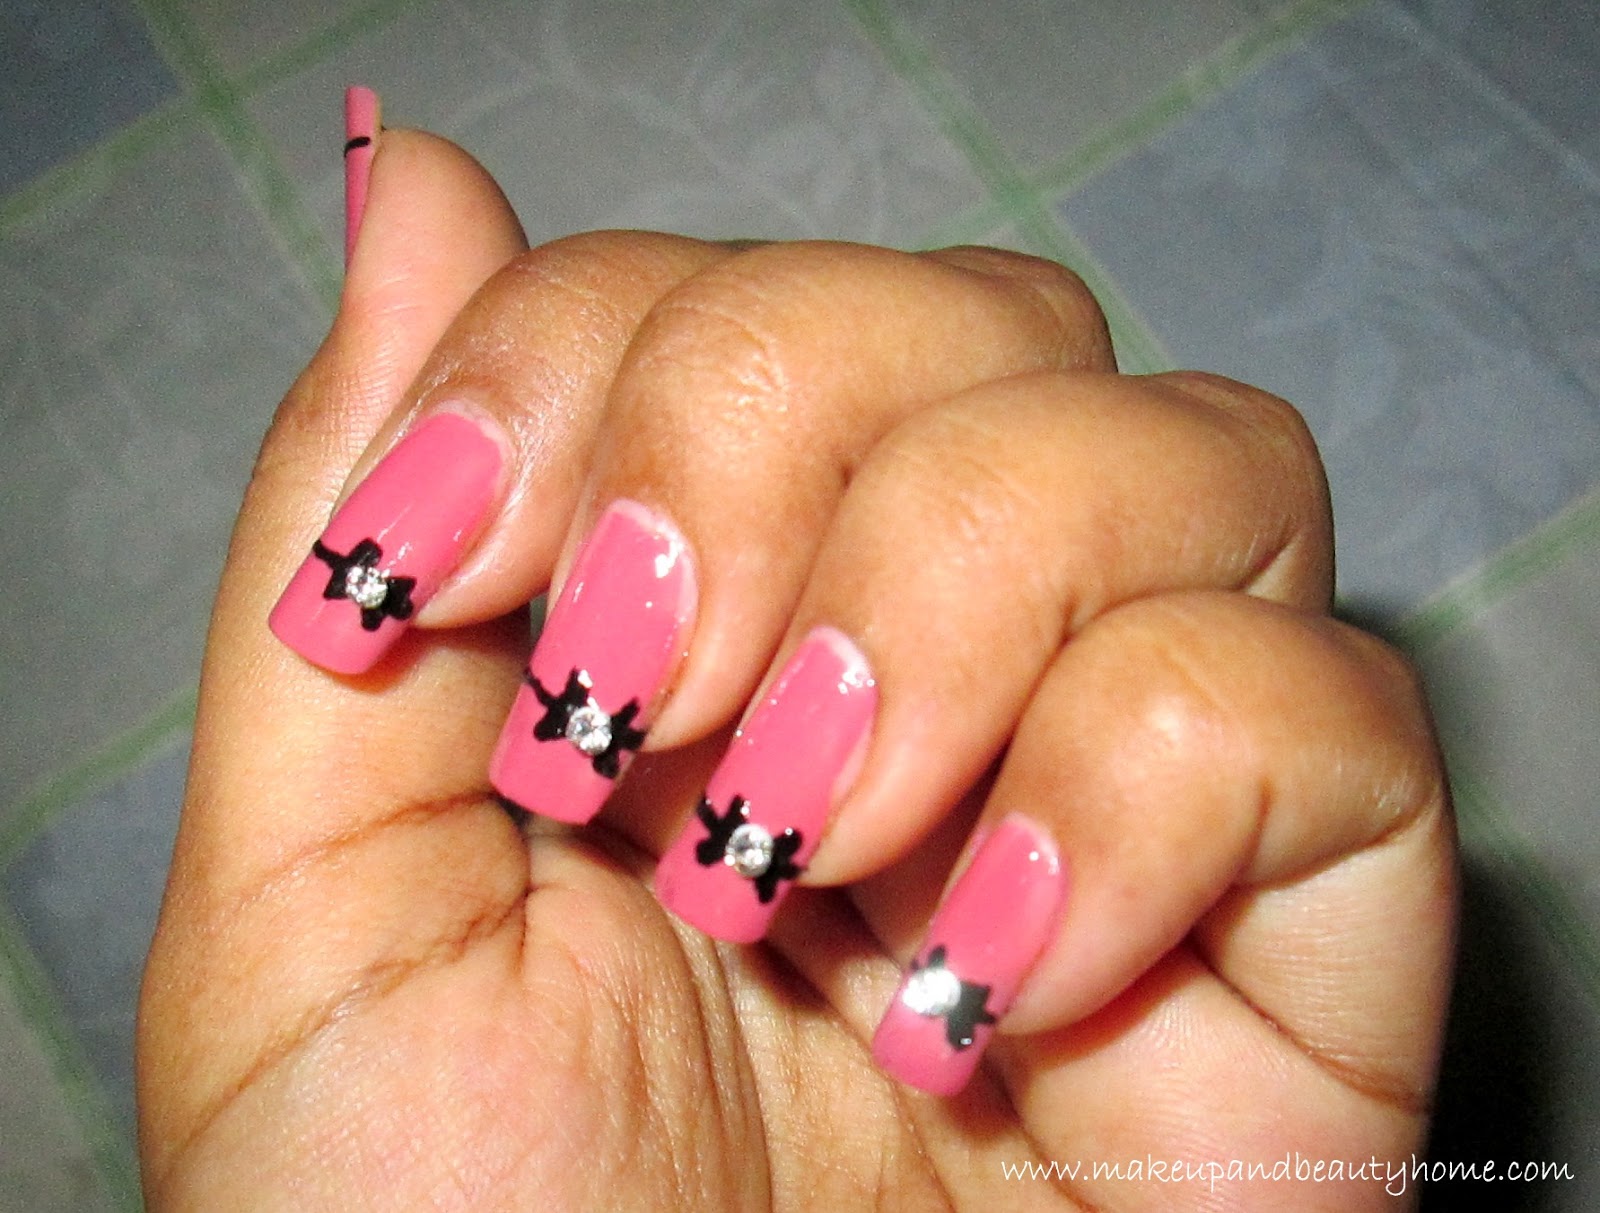 1. "3D Bow Nail Art Tutorial for Pointy Nails" - wide 9